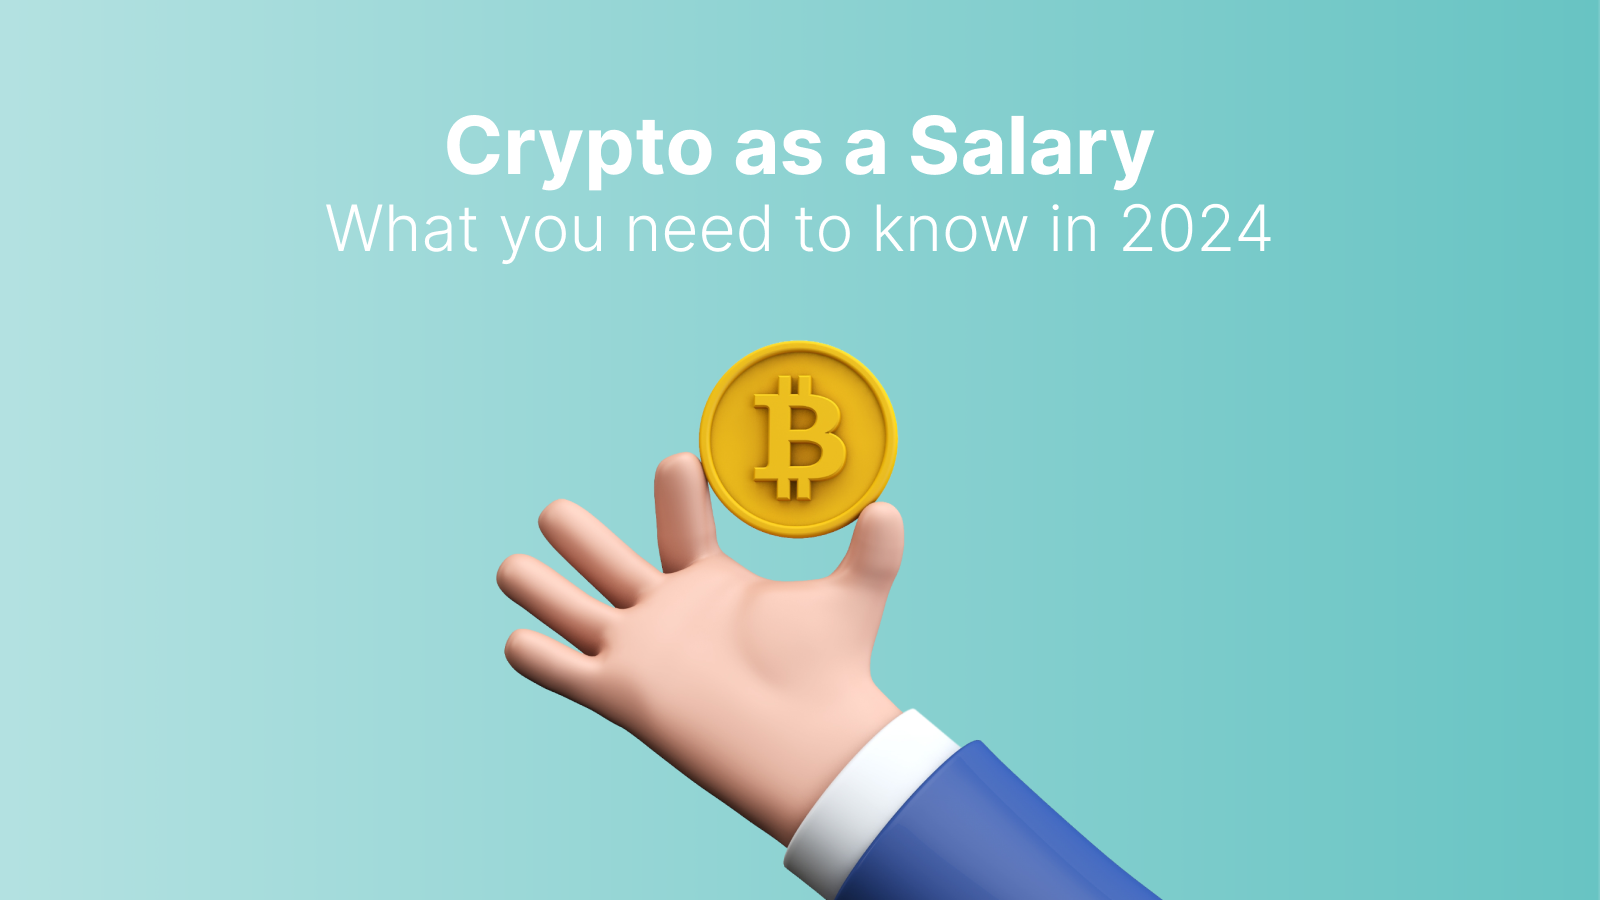 Jobs that Pay in Crypto - Cryptocurrency Jobs